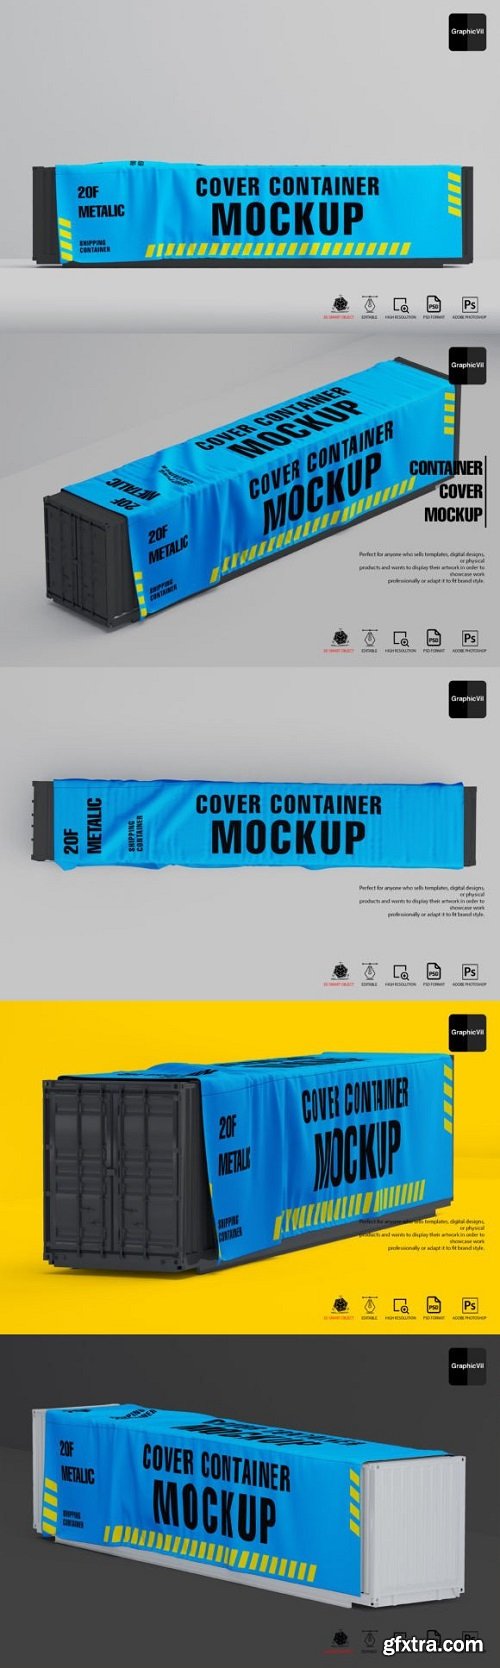 Container Cover Mockup